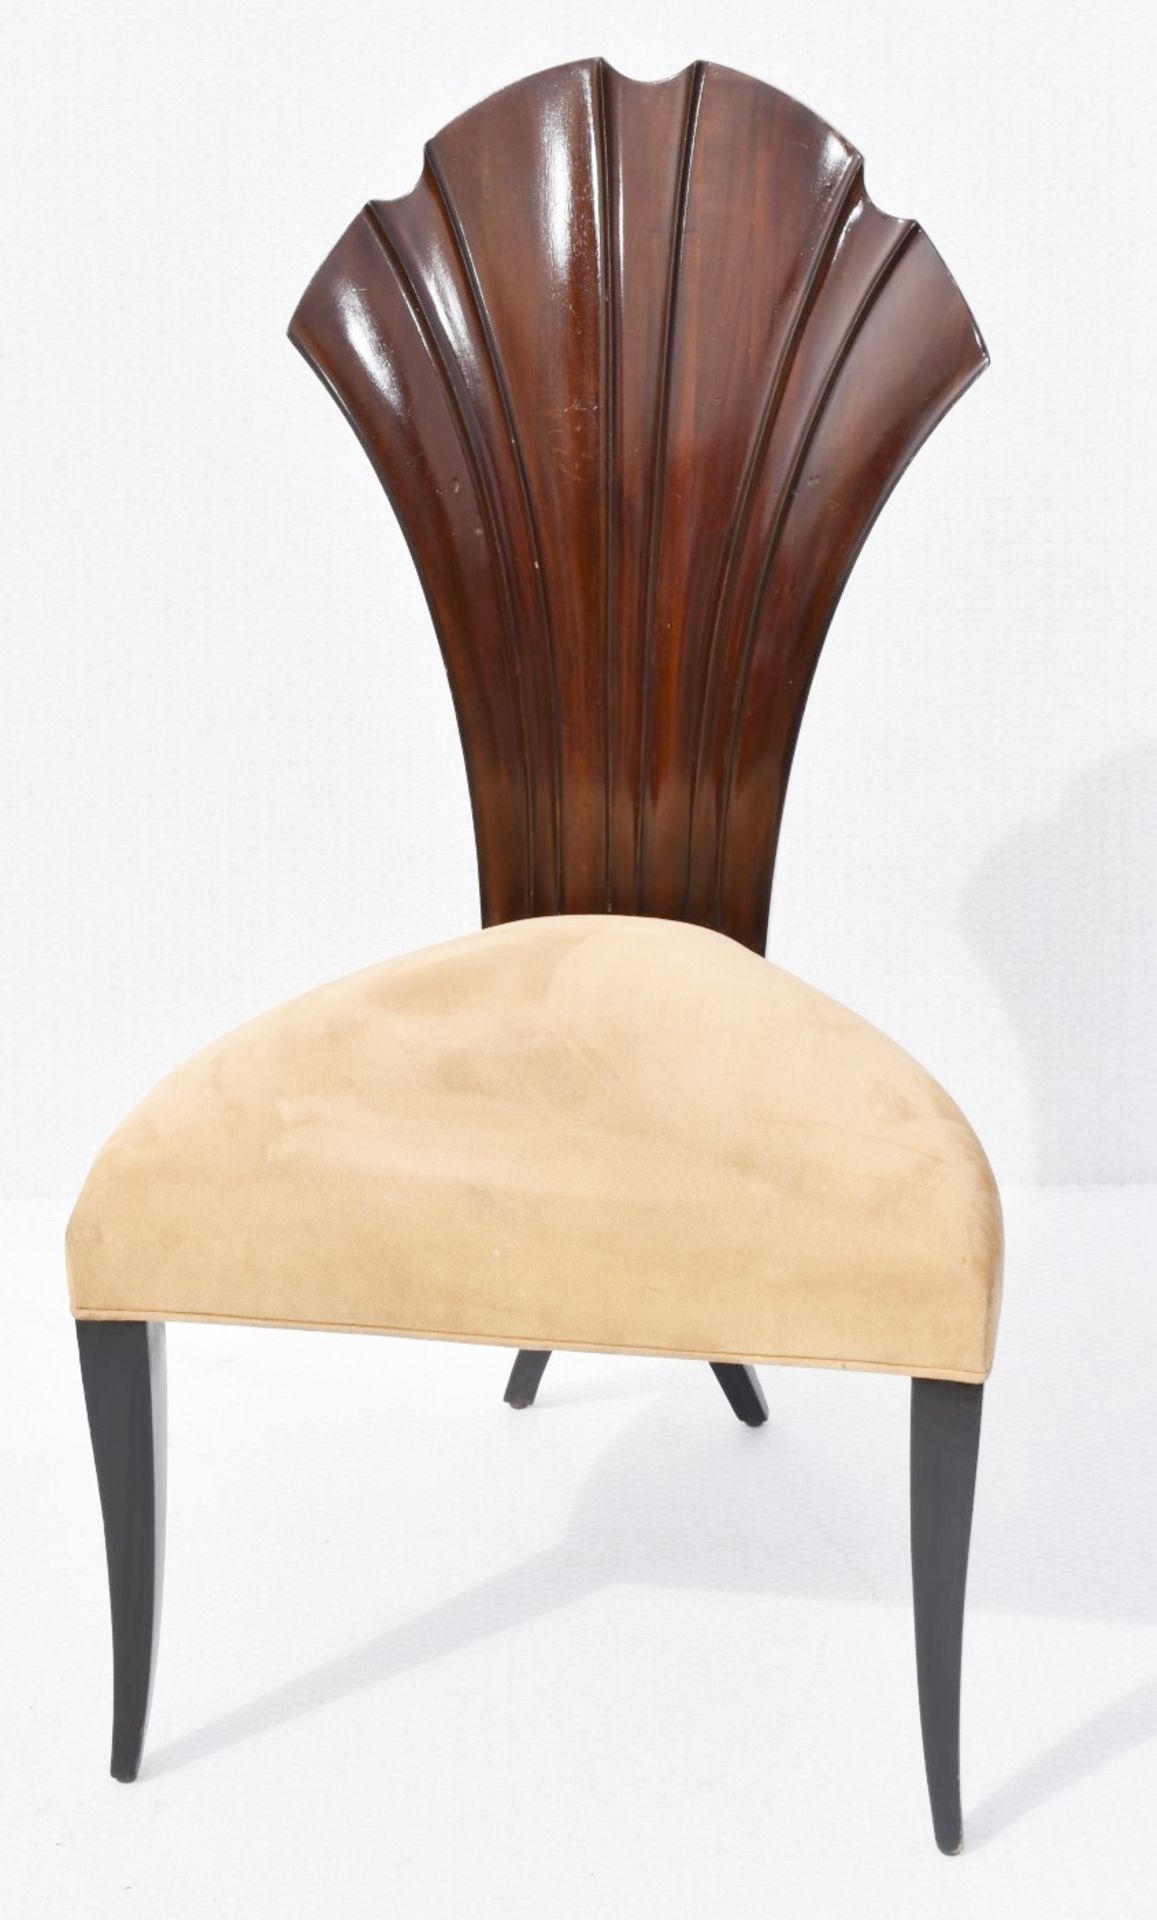 4 x CHRISTOPHER GUY 'La Croisette' Luxury Hand-carved Solid Mahogany Designer Dining Chairs -